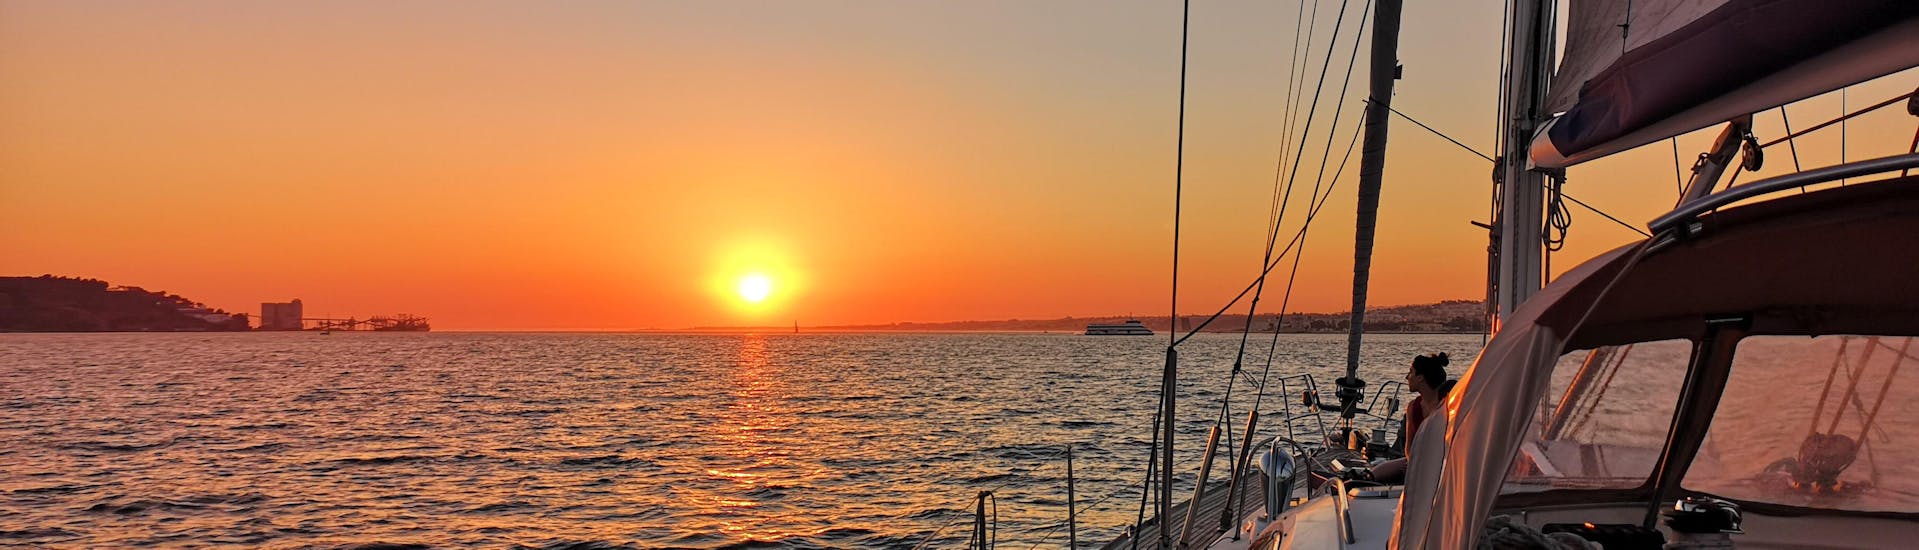 Watching the sunset during the Sunset Sailing Boat Trip on the Tagus